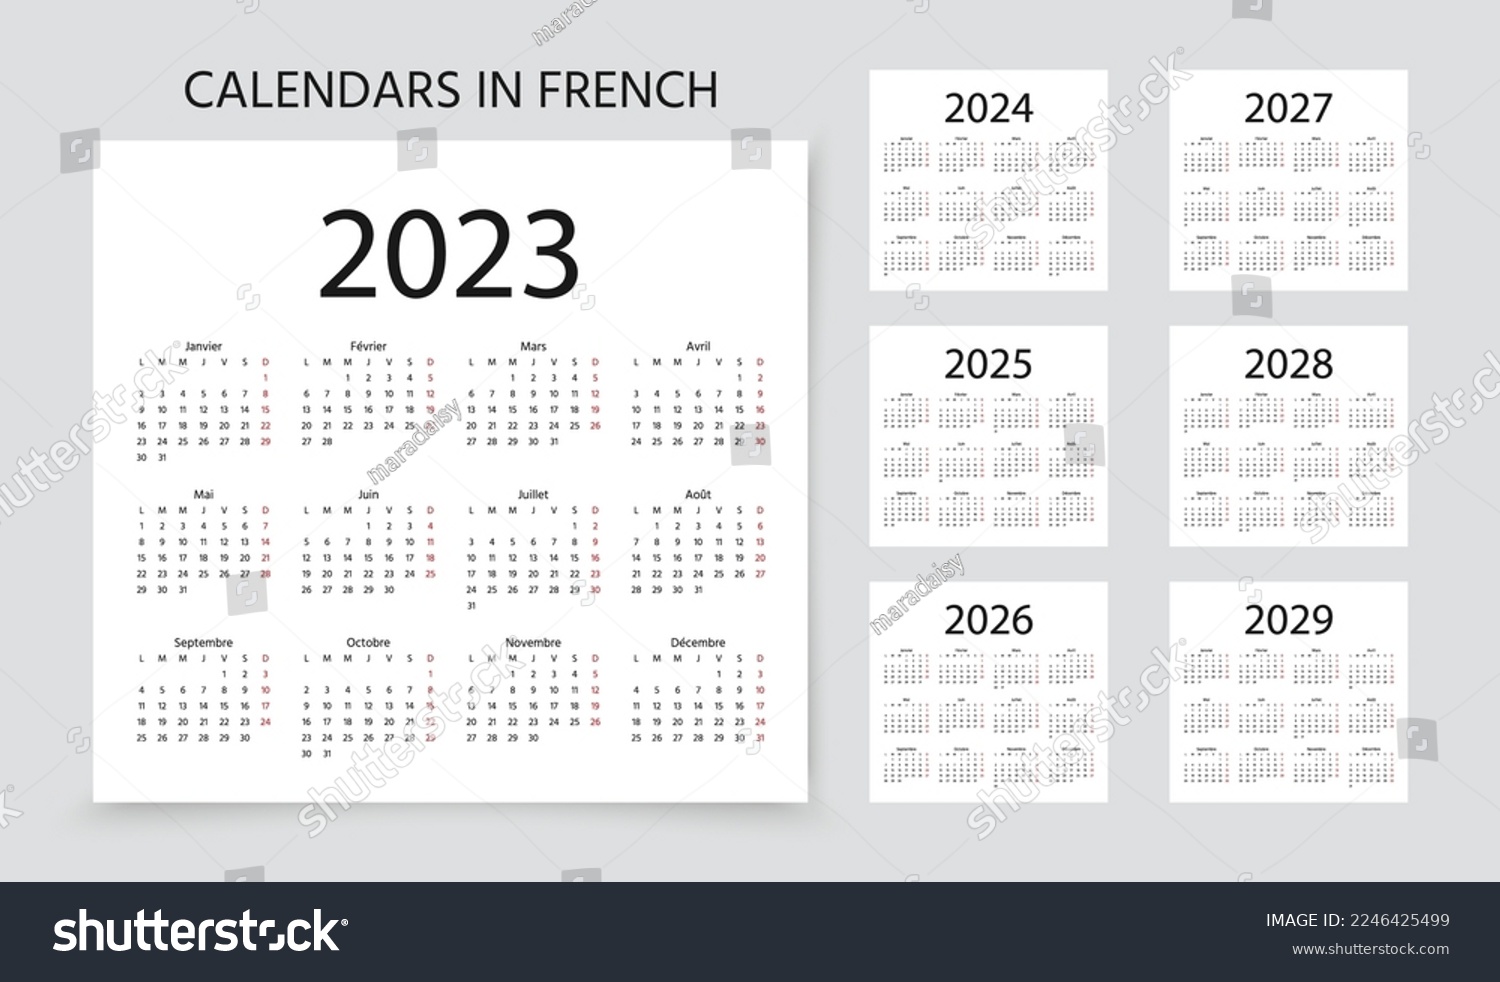 SVG of French Calendars for 2023, 2024, 2025, 2026, 2027, 2028, 2029 years. Week starts Monday. France calender template. Scheduler layout with 12 month. Yearly organizer in simple design Vector illustration svg